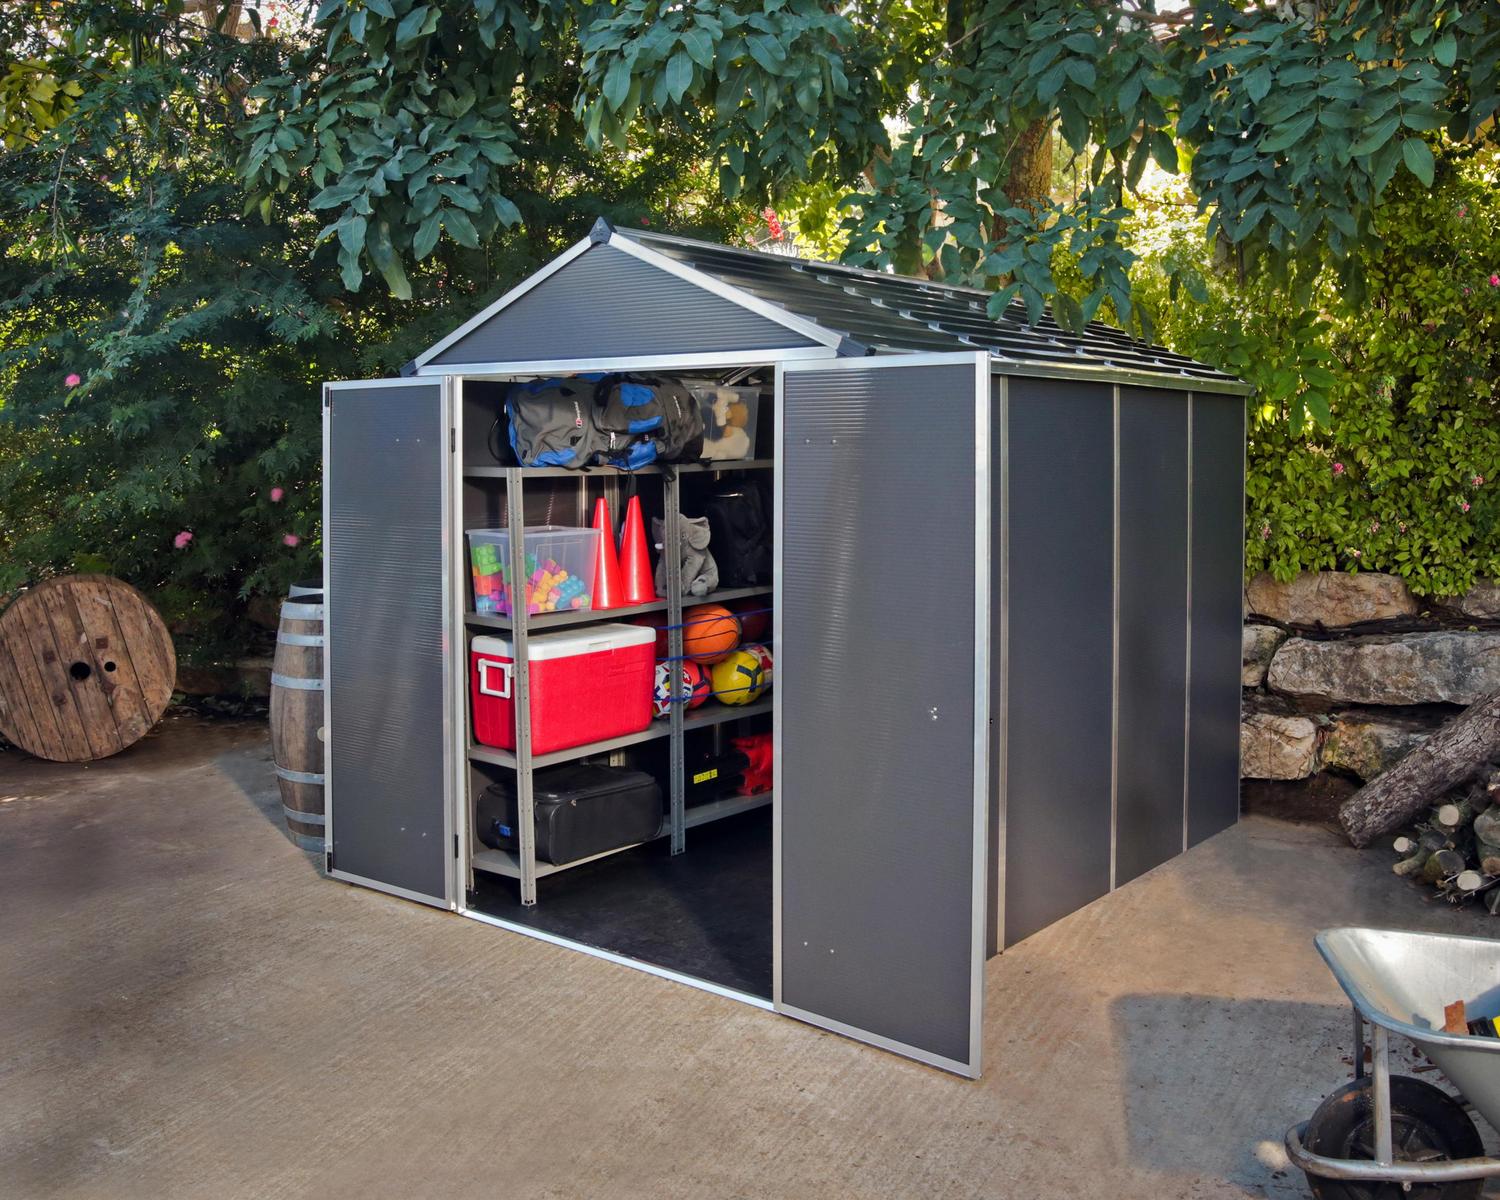 Rubicon 6&#039; x 10&#039; Plastic Garden Shed with Open Doors Dark Grey Polycarbonate Walls and Aluminium Frame